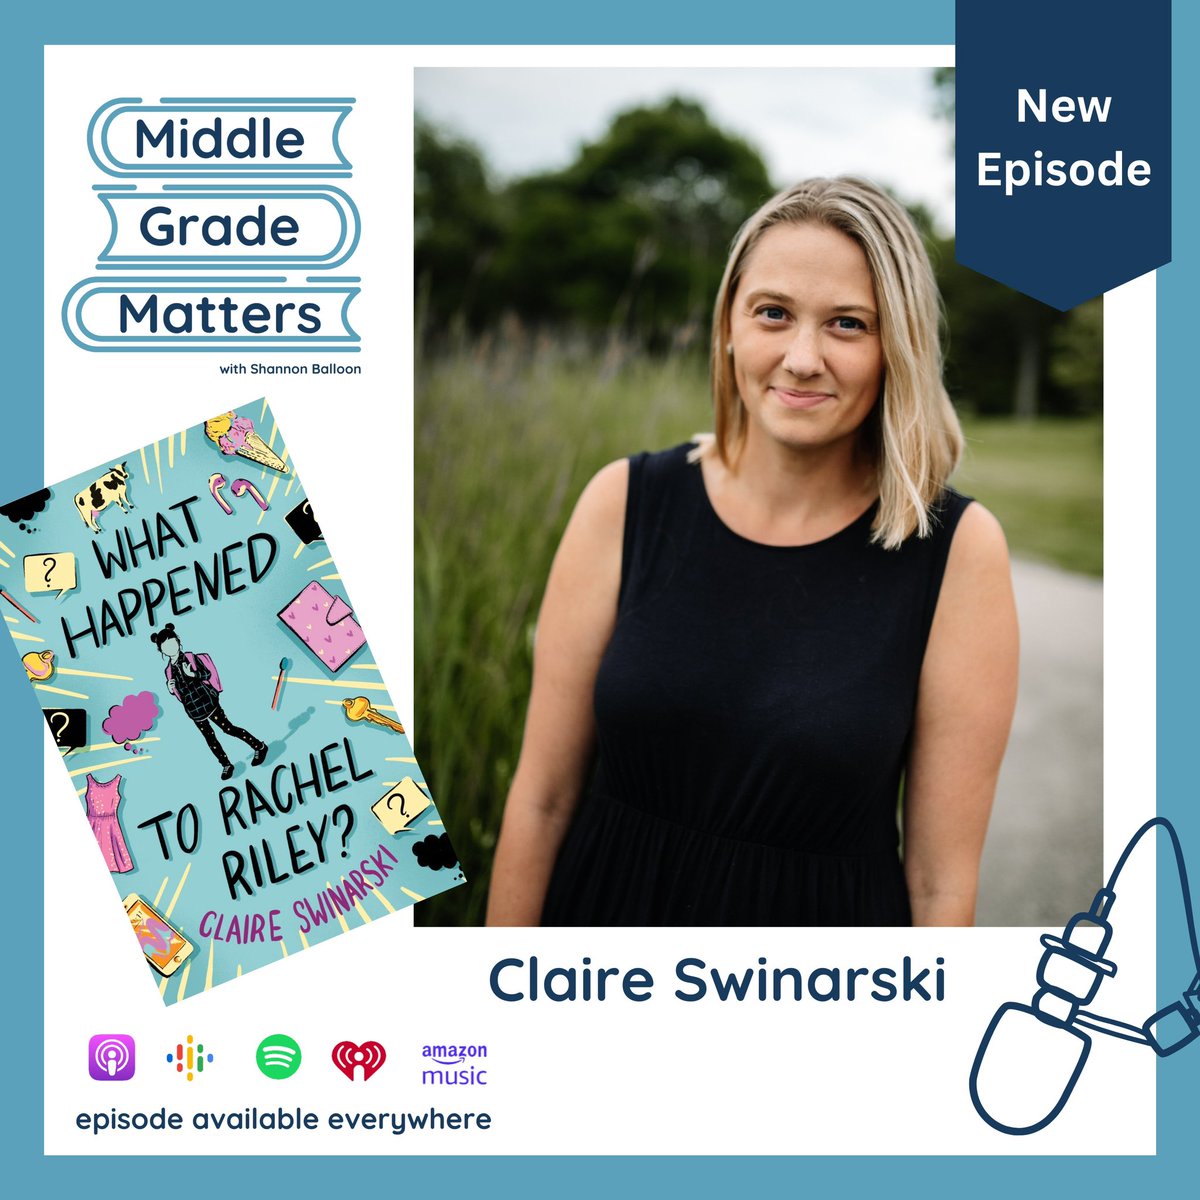 We’re launched! Listen on Apple Podcasts or your favorite podcast player. (Links in bio). @claireswinarski  

#middlegradematterspodcast #middlegrade #middlegradewriters #middlegradereaders